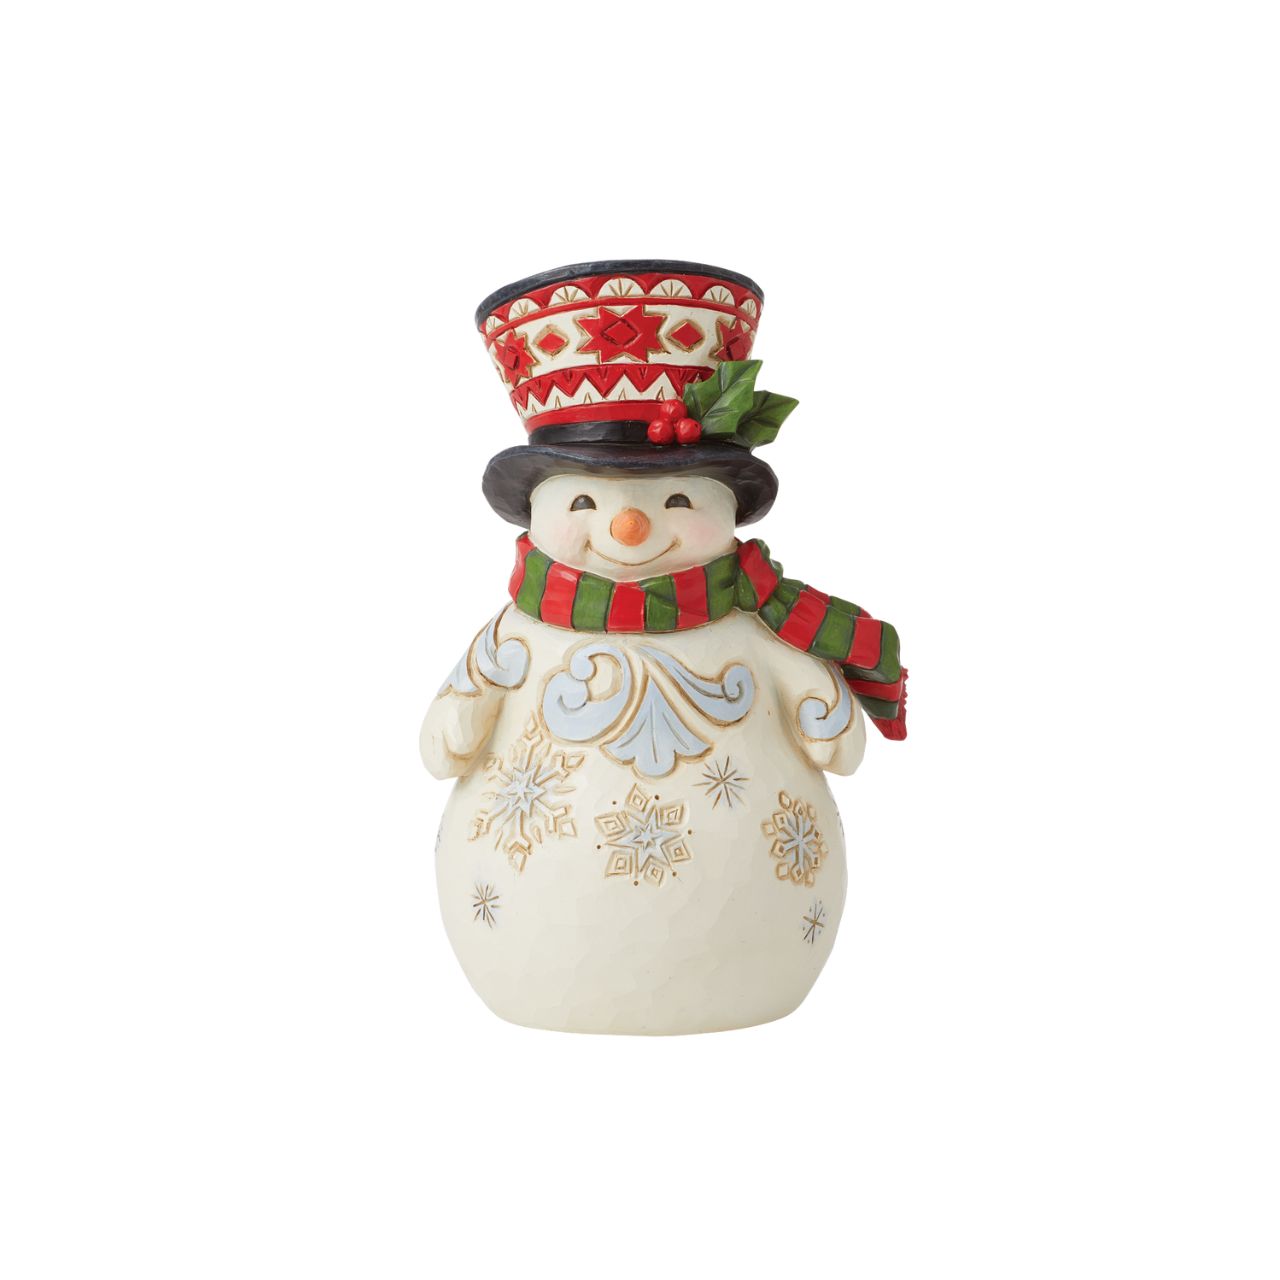 Pint Sized Snowman with Large Hat Figurine  Traditional Heartwood Creek Collection; Wood carved textures and intricately detailed designs. Unique andsometimes surprising combinations of colours. This collection of festive pint sized figurines are the perfect addition to a collection, without breaking the bank. This particular